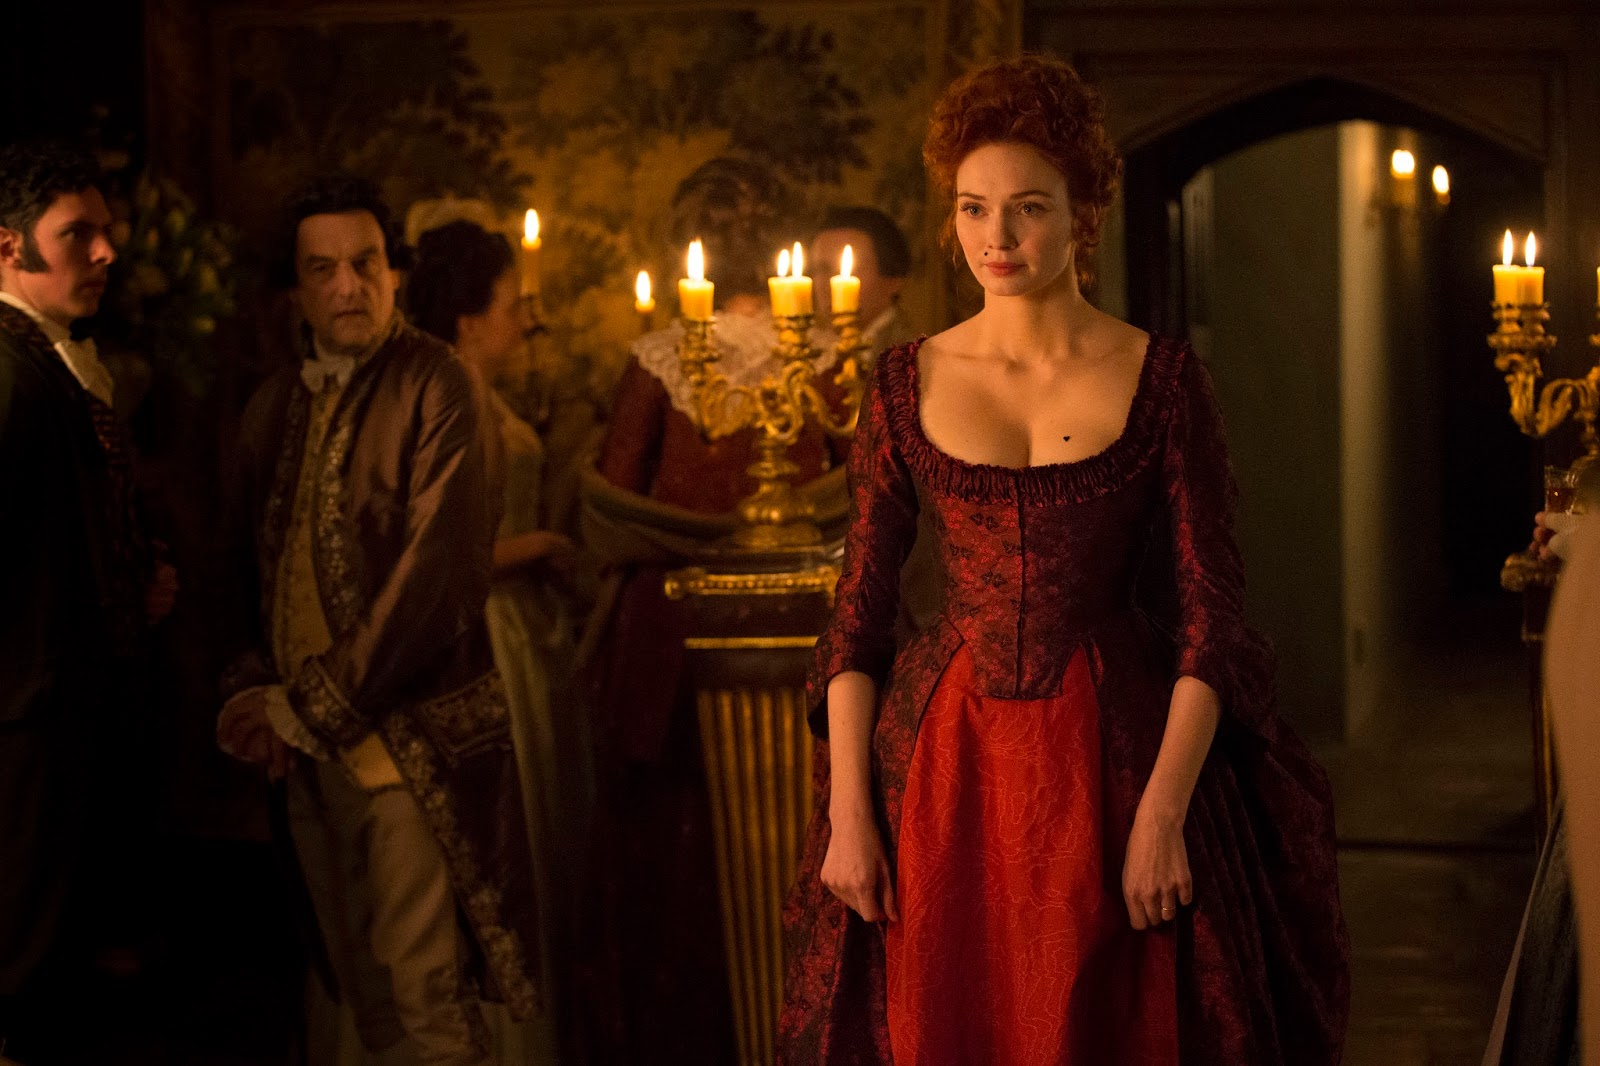 Poldarked Dressing the Women from 'Poldark' Review